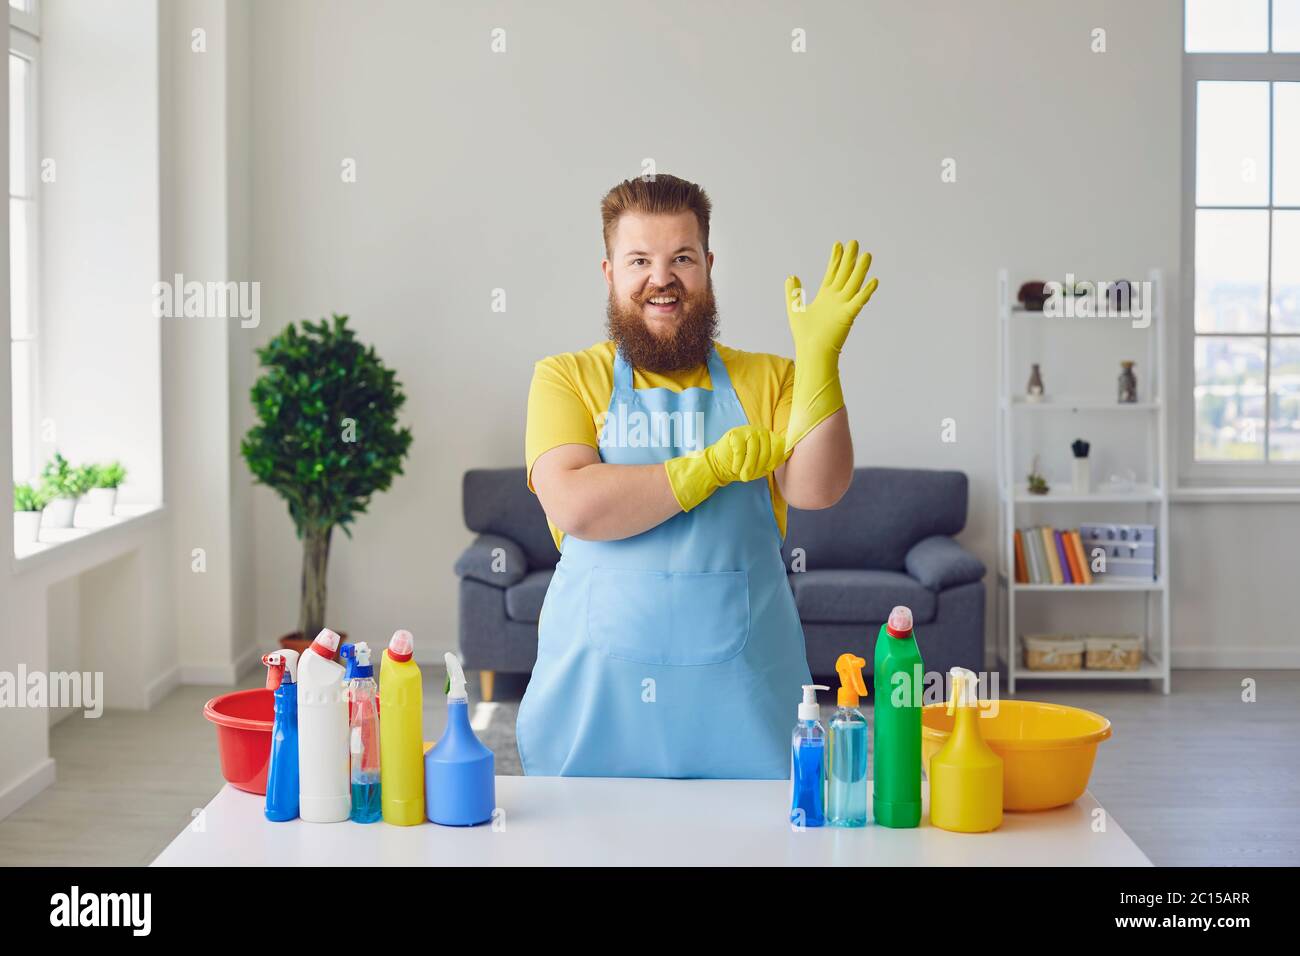 Cleaning man in room. Cheerful man in rubber gloves with cleaning products at home Stock Photo